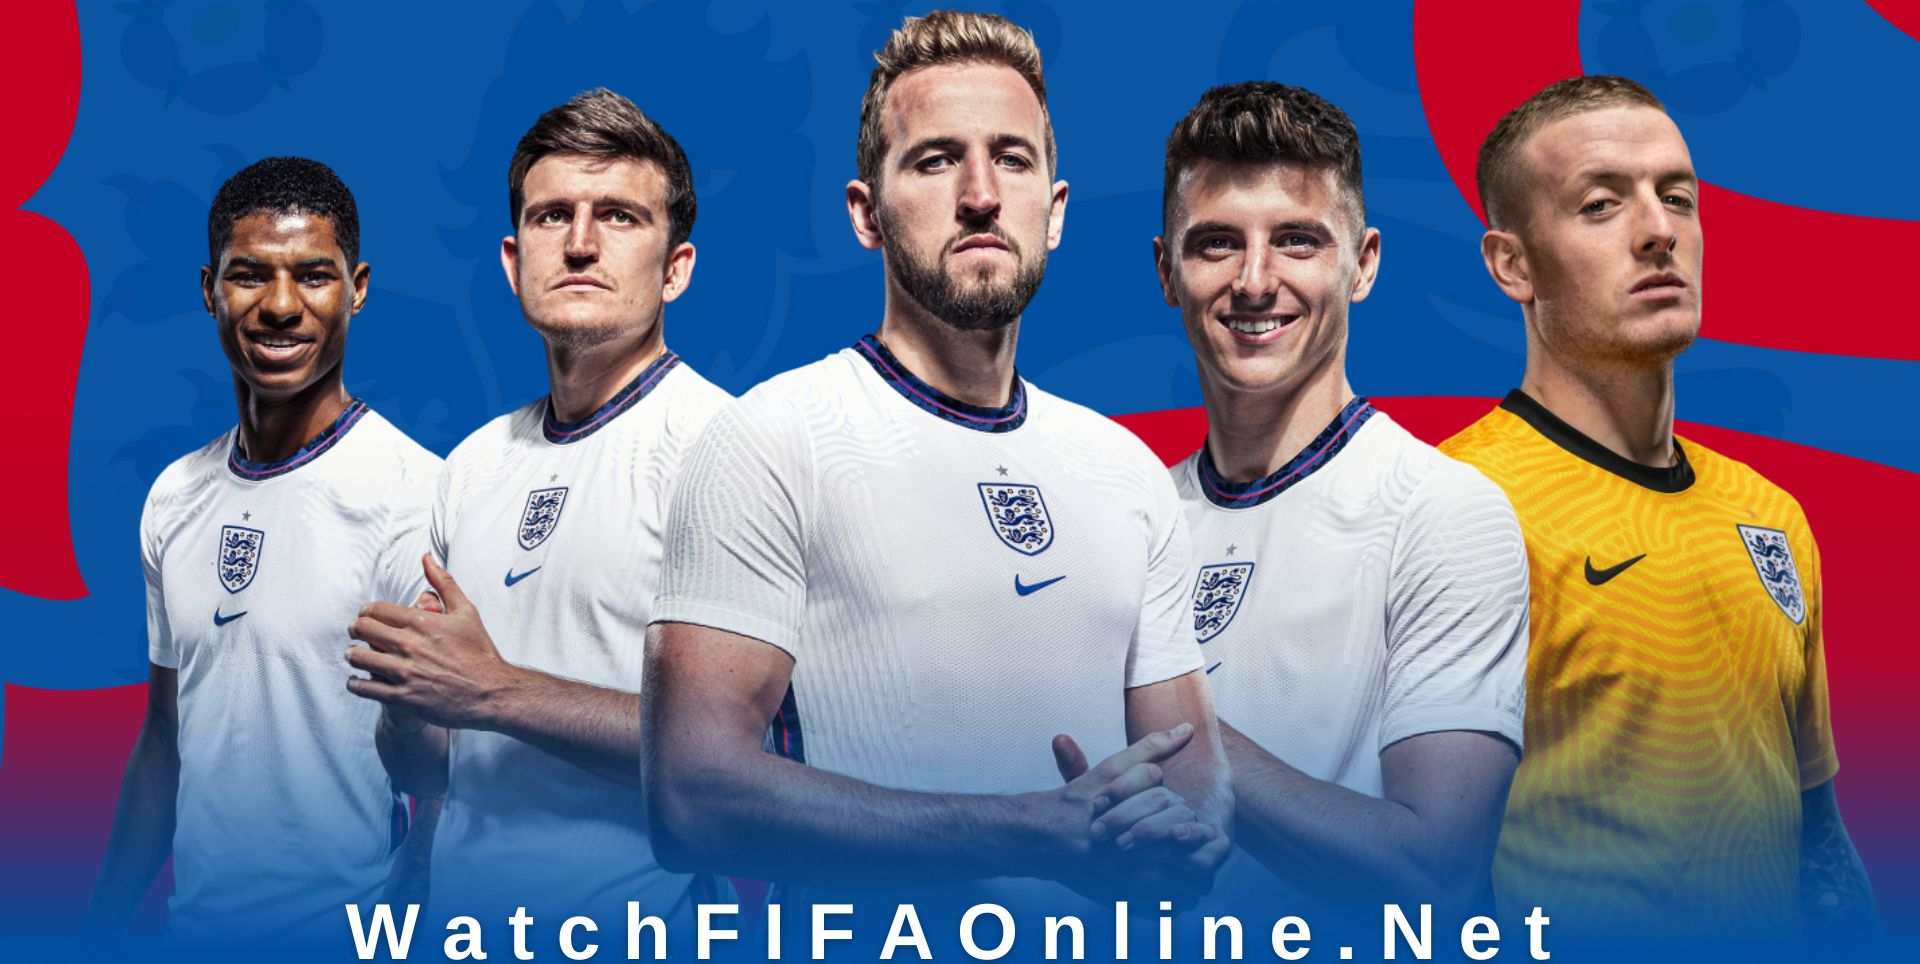 england-matches-at-the-fifa-world-cup